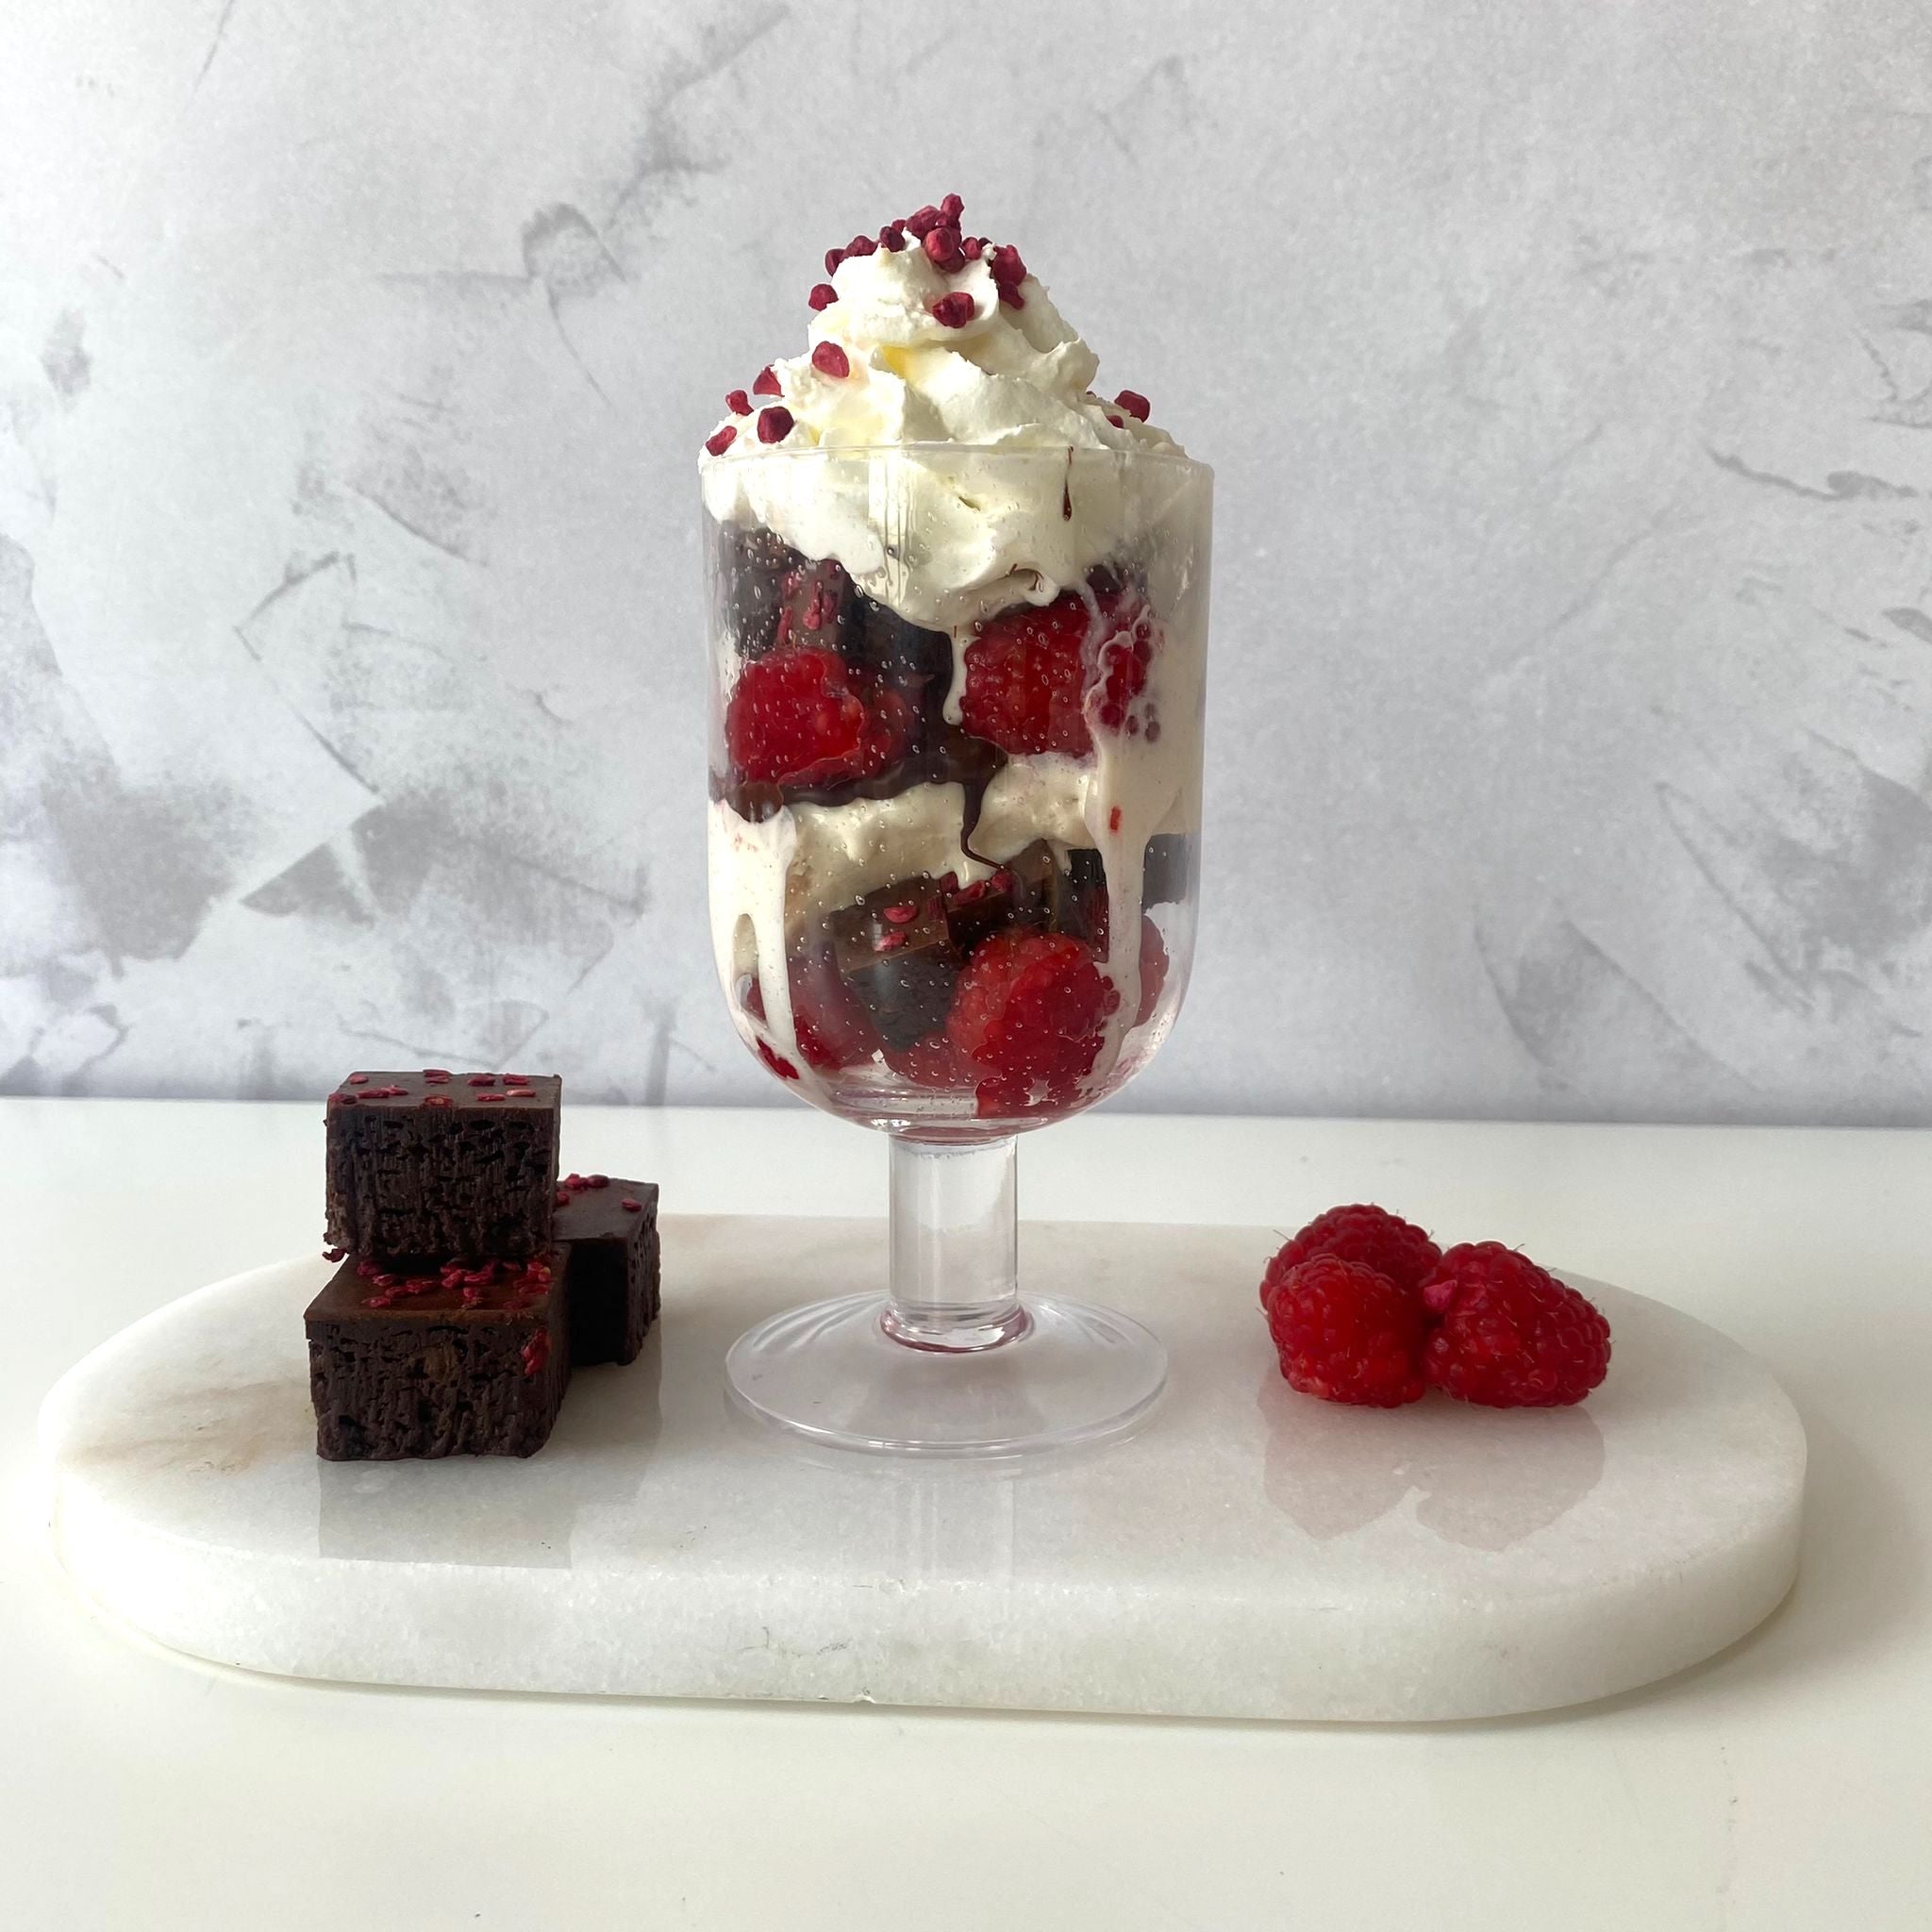 Cool Recipes For Hot Days - Brownie Sundae